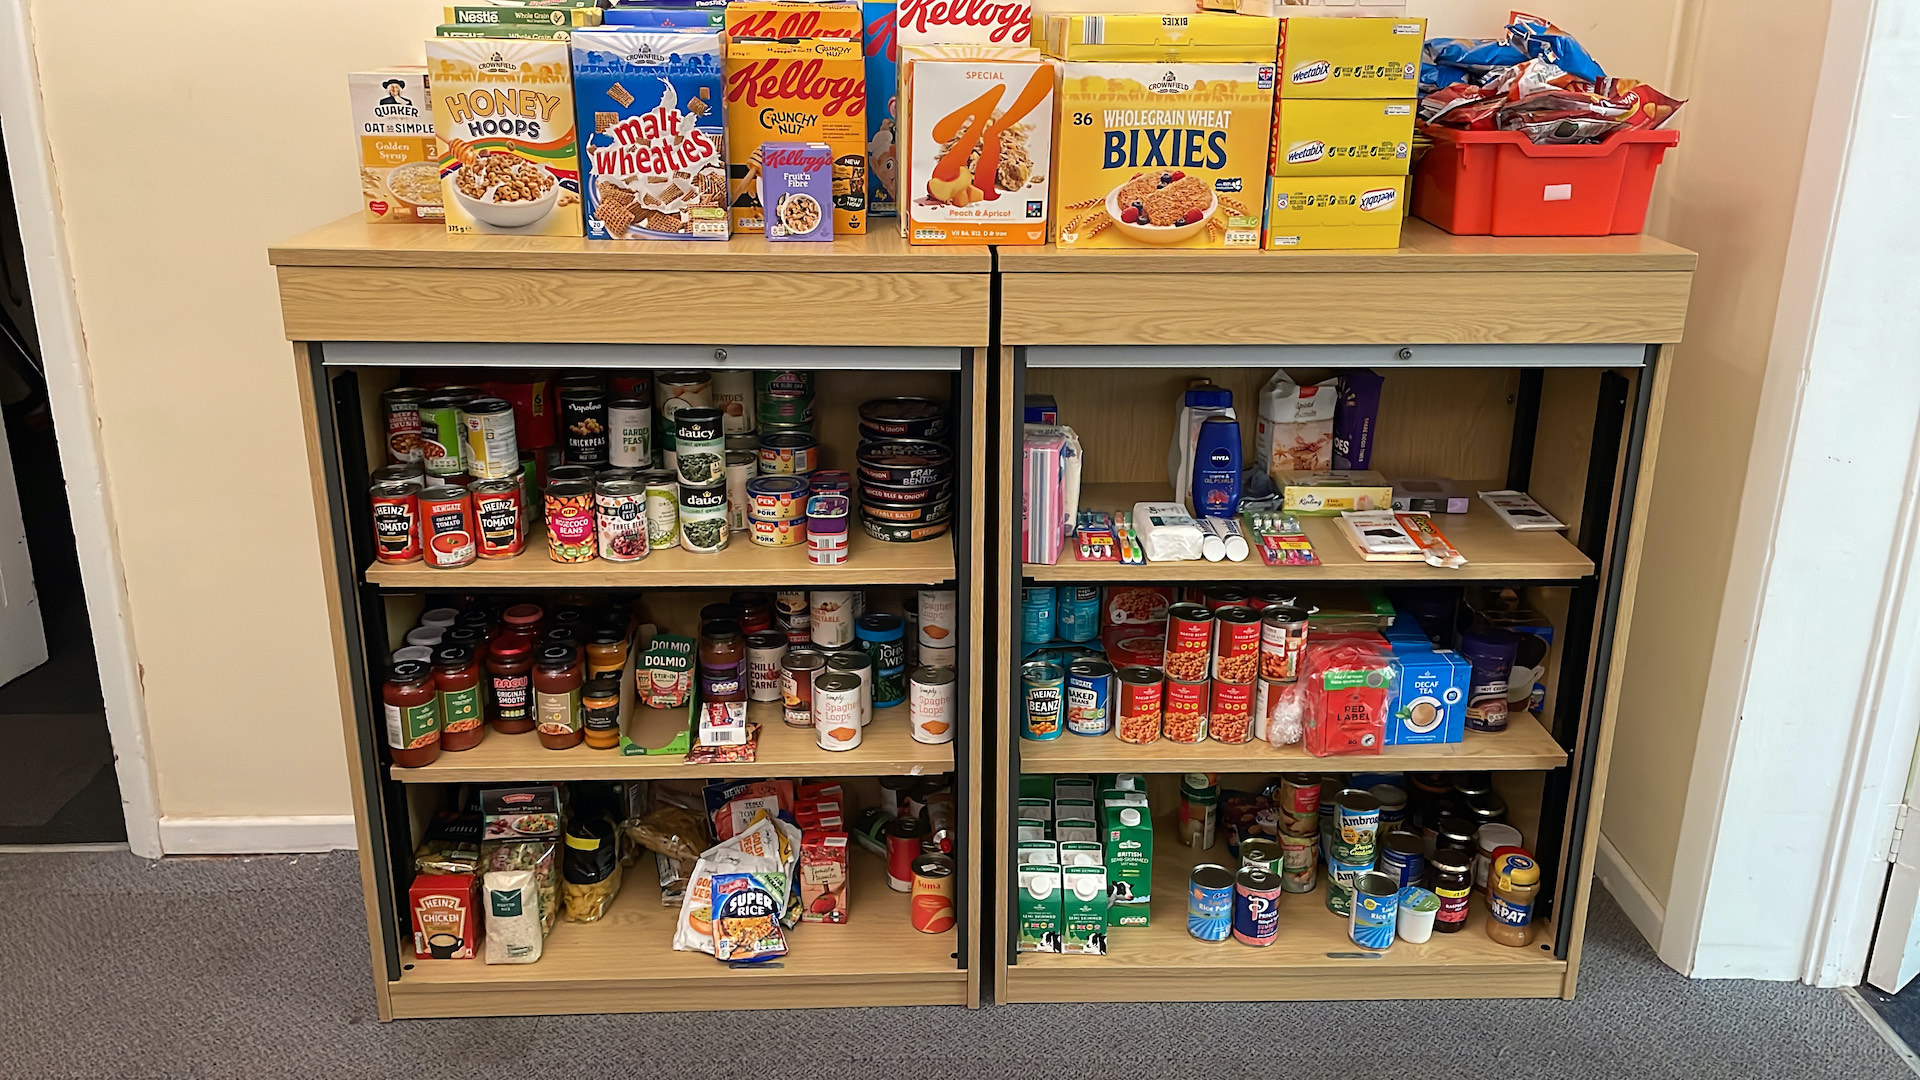 Cereal and cans of food sit in a low cupboard